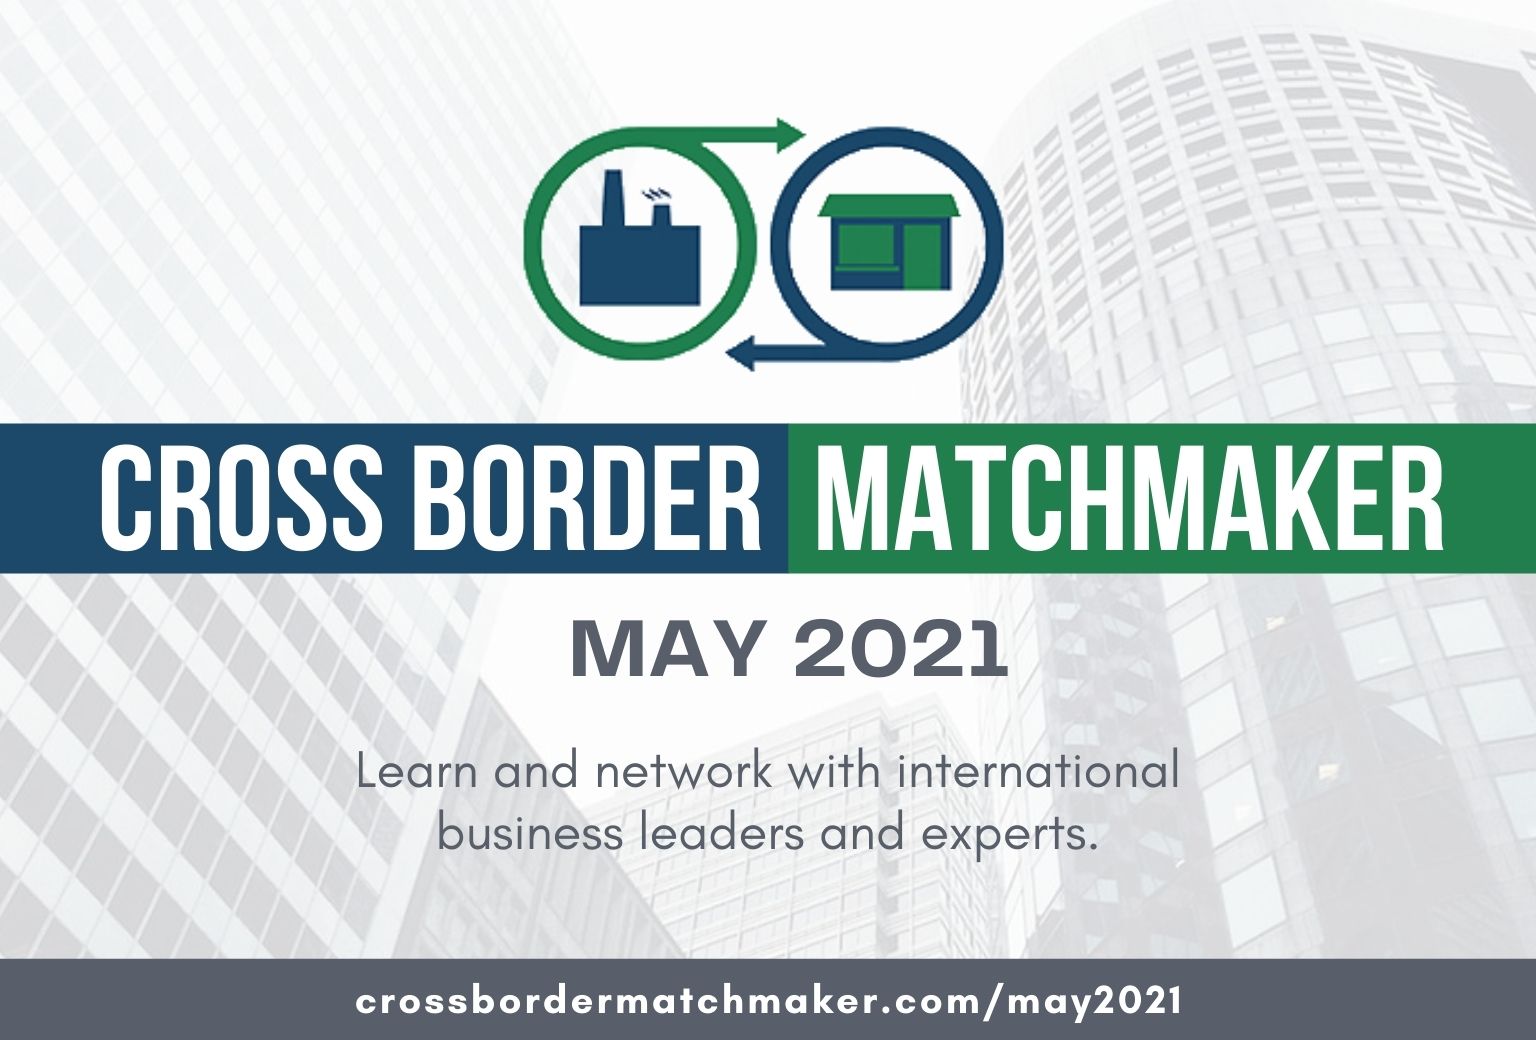 Featured image for “Cross Border Matchmaker May 2021”